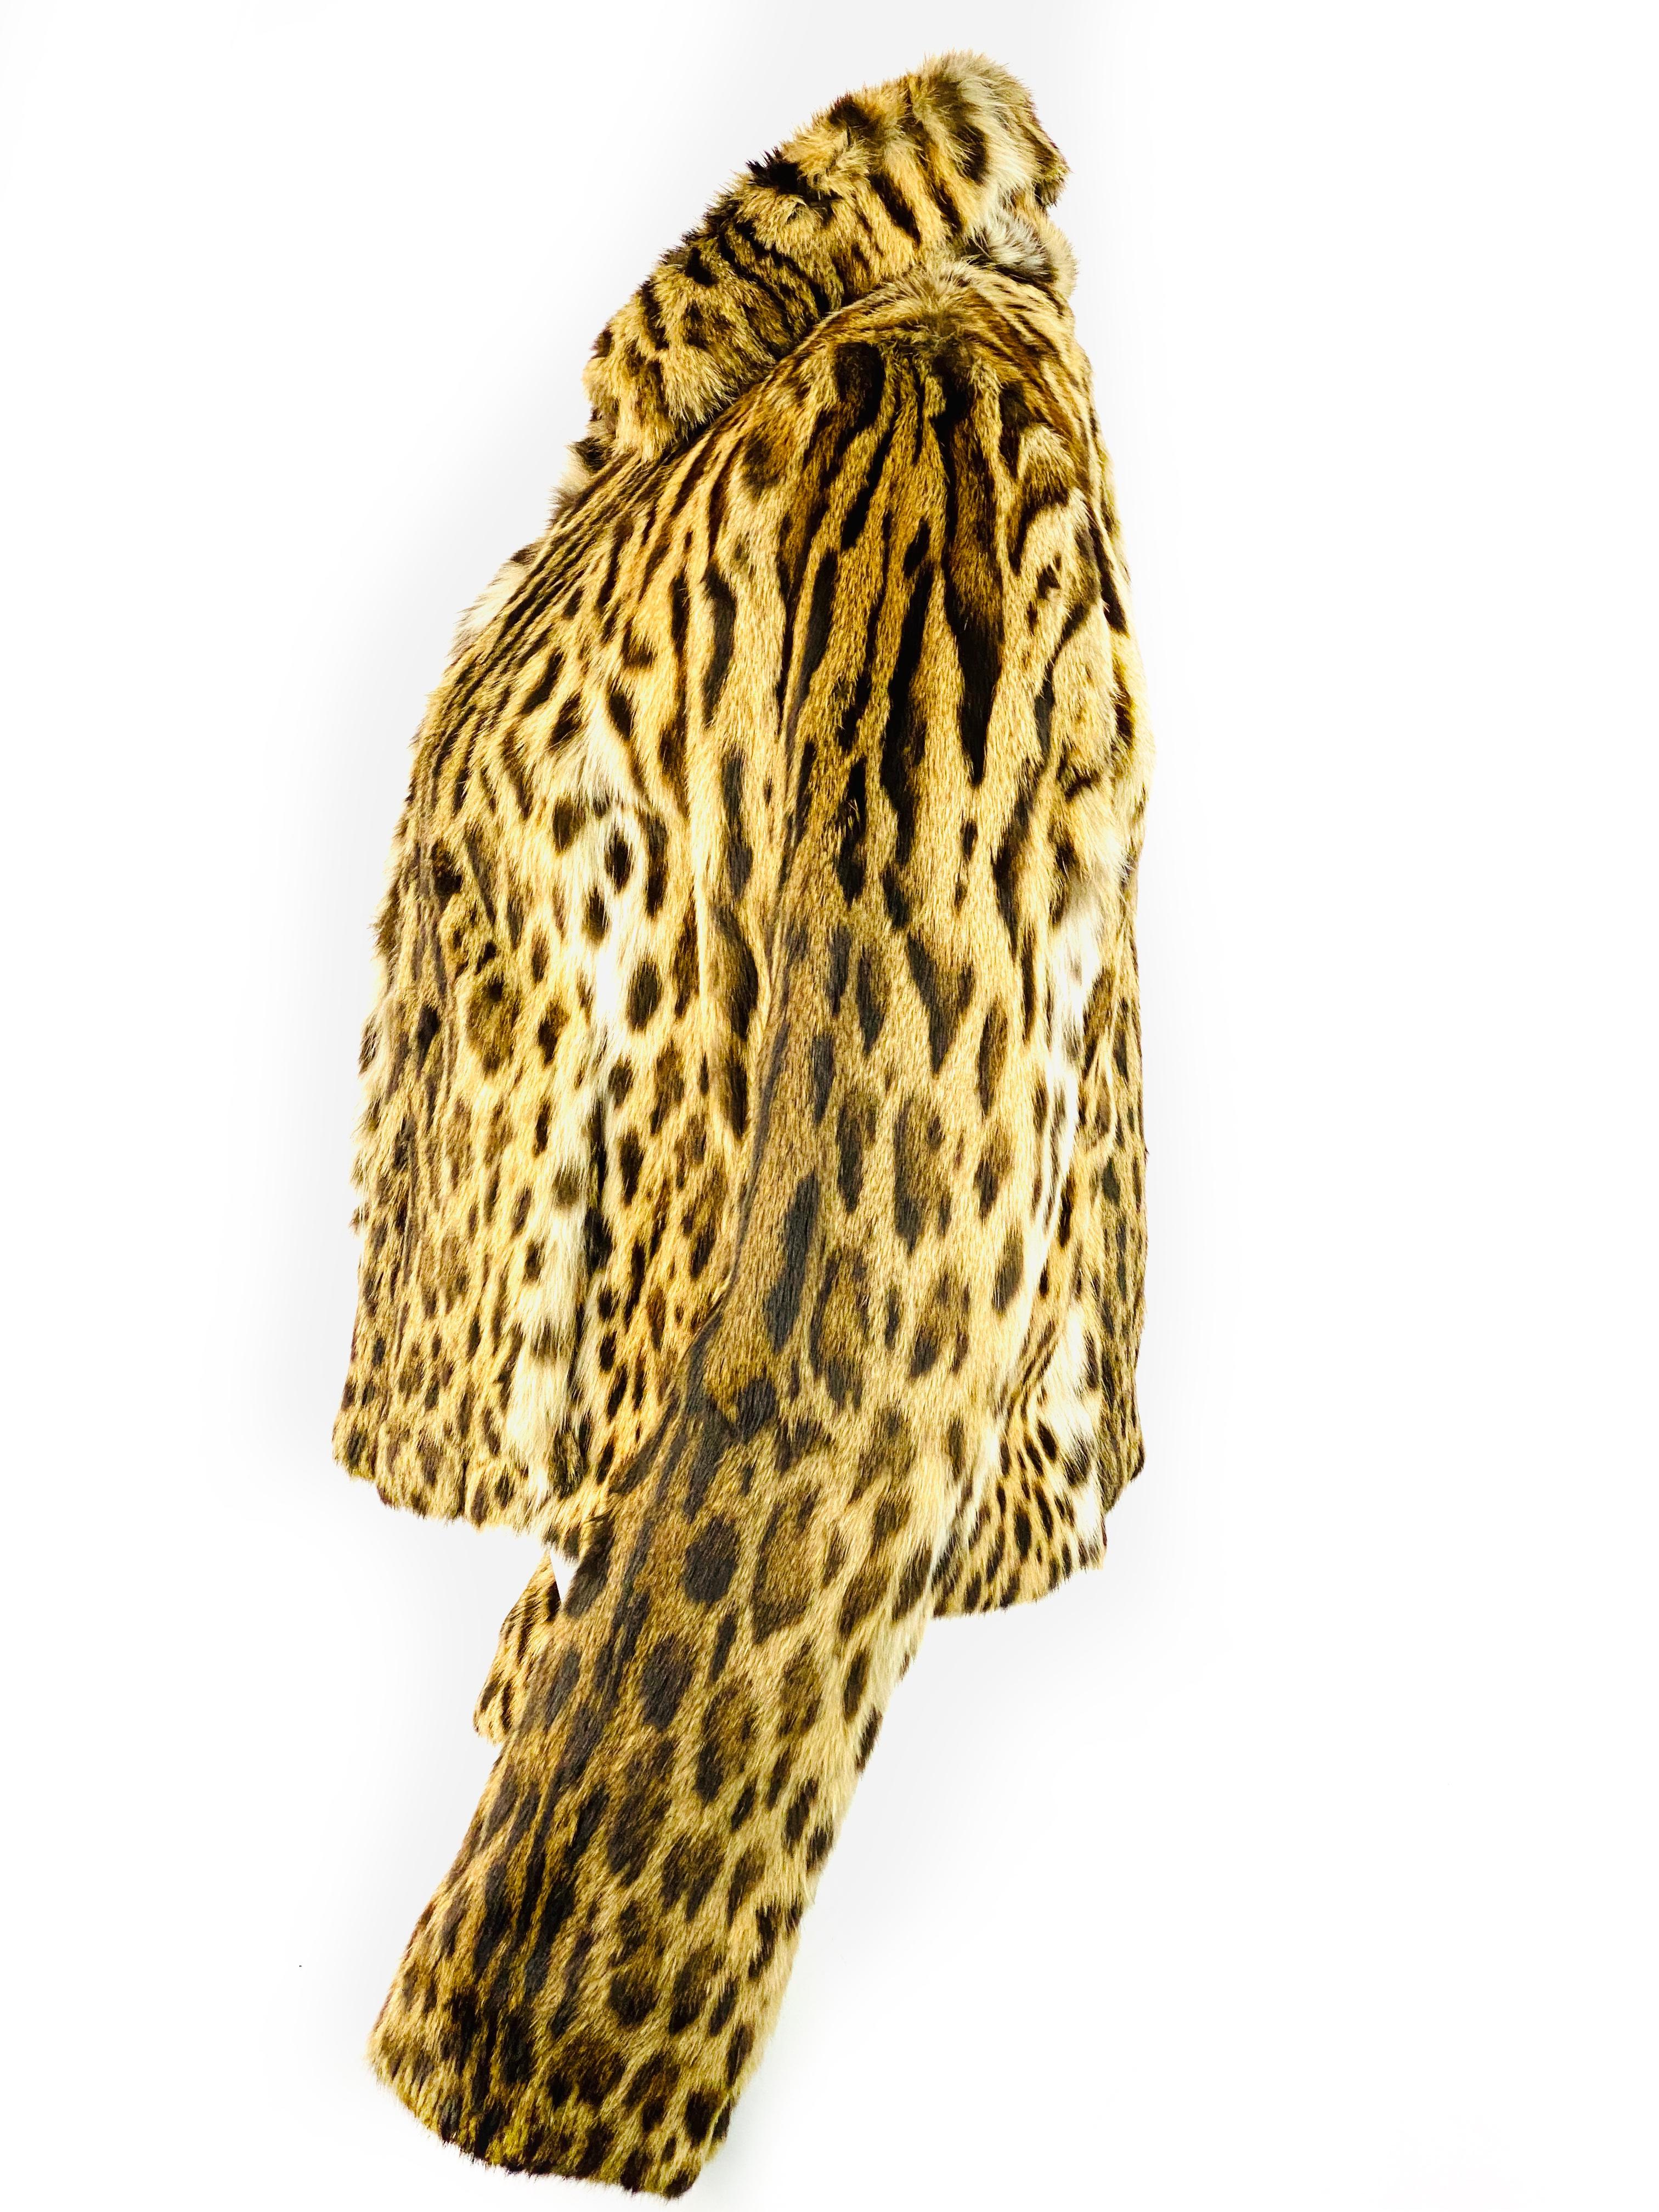 Marni Brown and Black Leopard Animal Fur Jacket Size 42

Product details:
Size 42
100% Cotton
100% Fur
Leopard/ cheetah animal pattern
The fur feel very soft
Featuring slit detail on each sleeve. measure 4